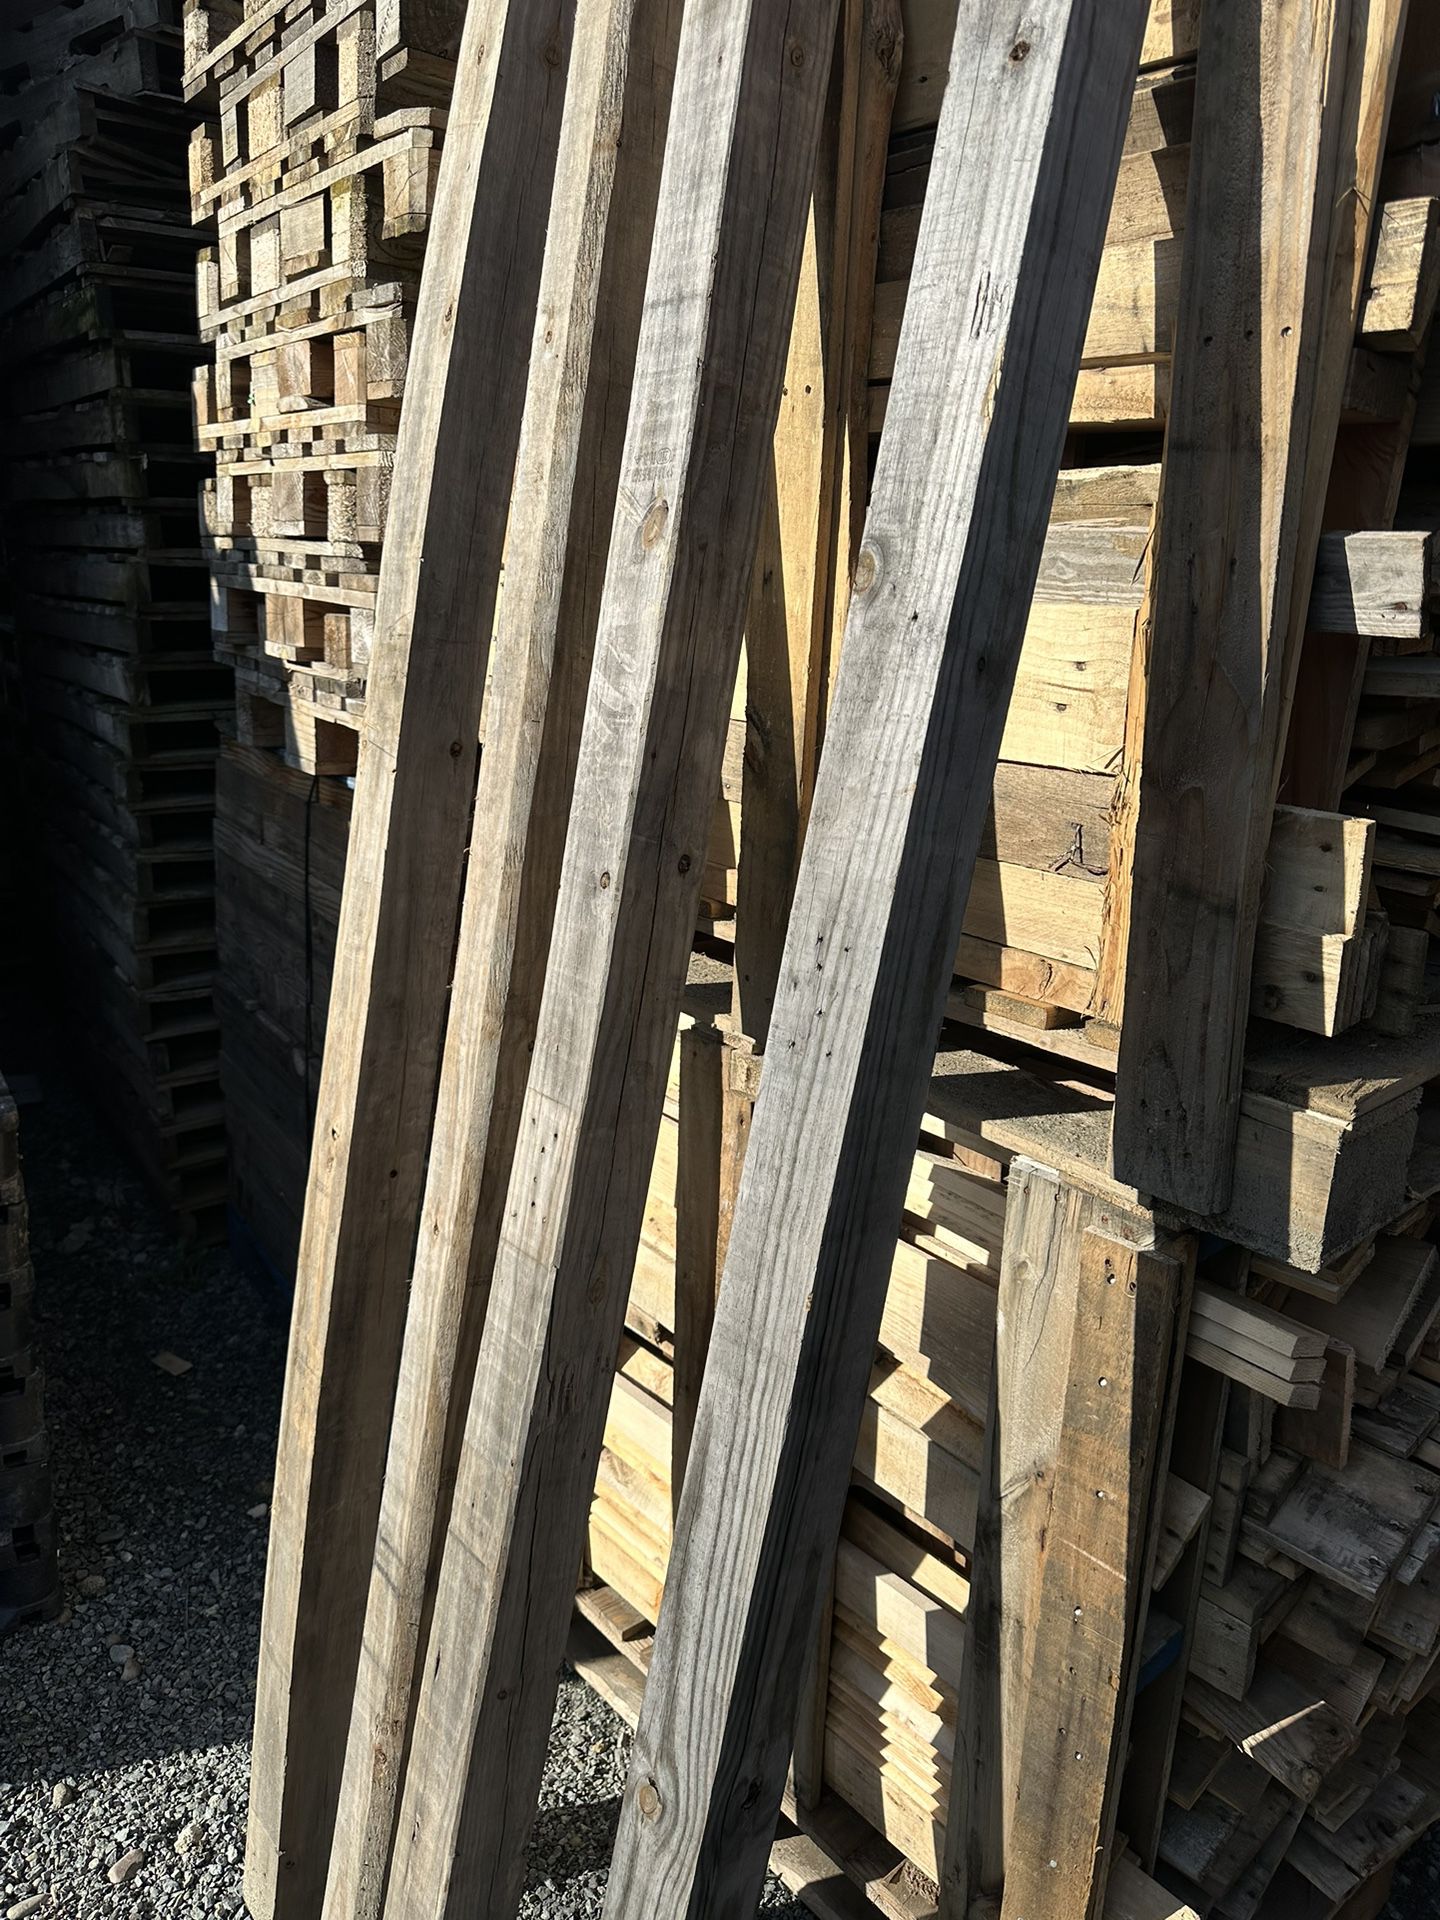 Fence Posts 114 In Long $10 Ea